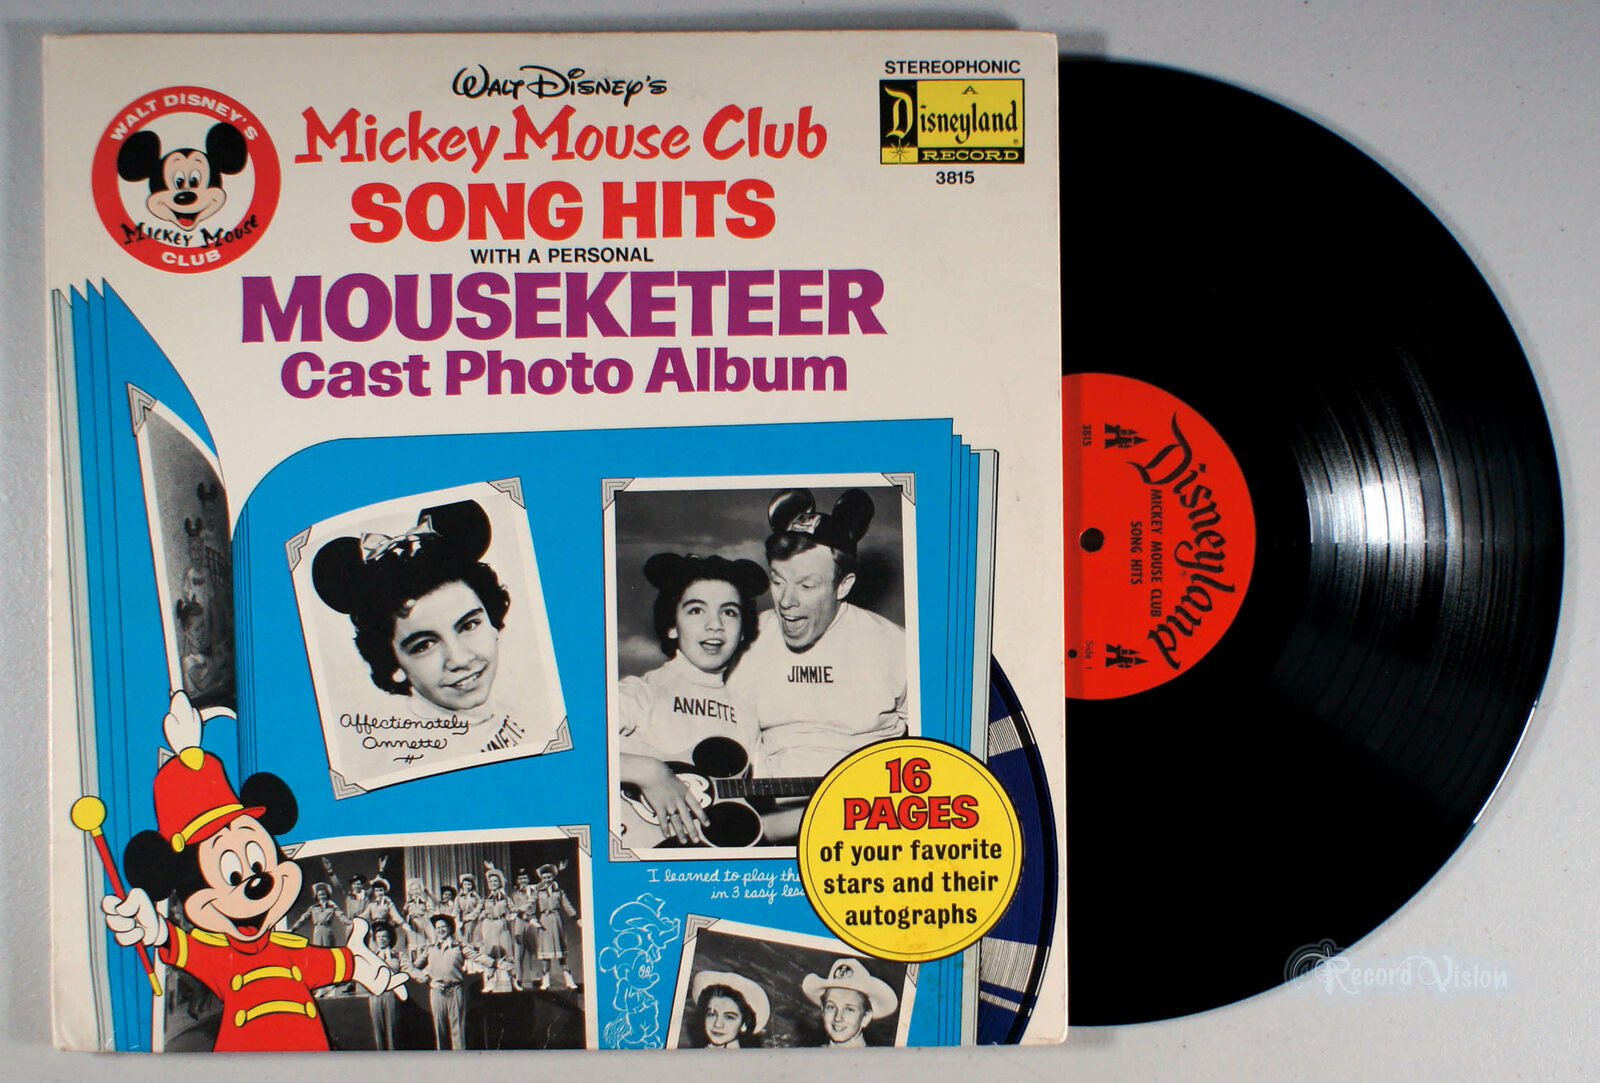 Disney - Mickey Mouse Club Song Hits (1975) Vinyl LP + BOOK, Soundtrack, Annette